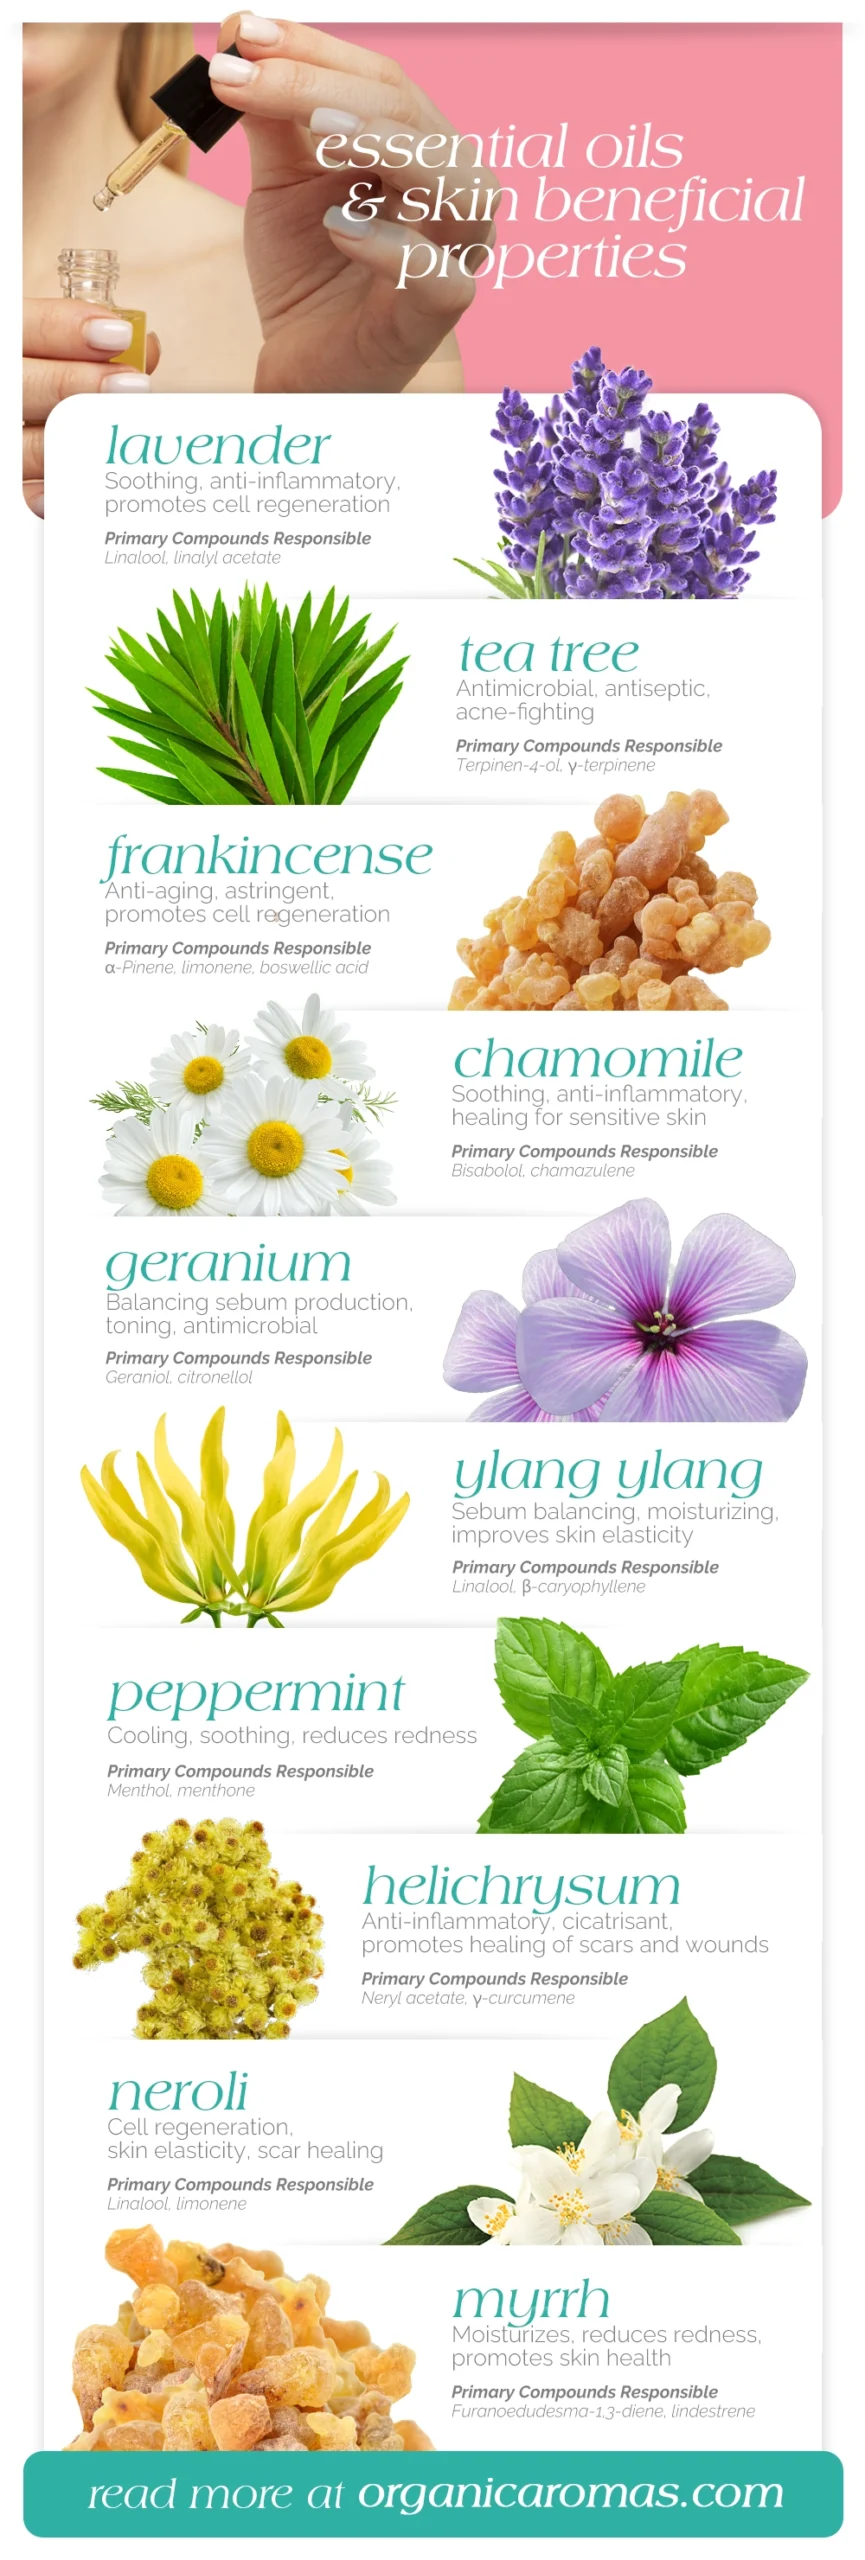 Essential oils and skin beneficial properties